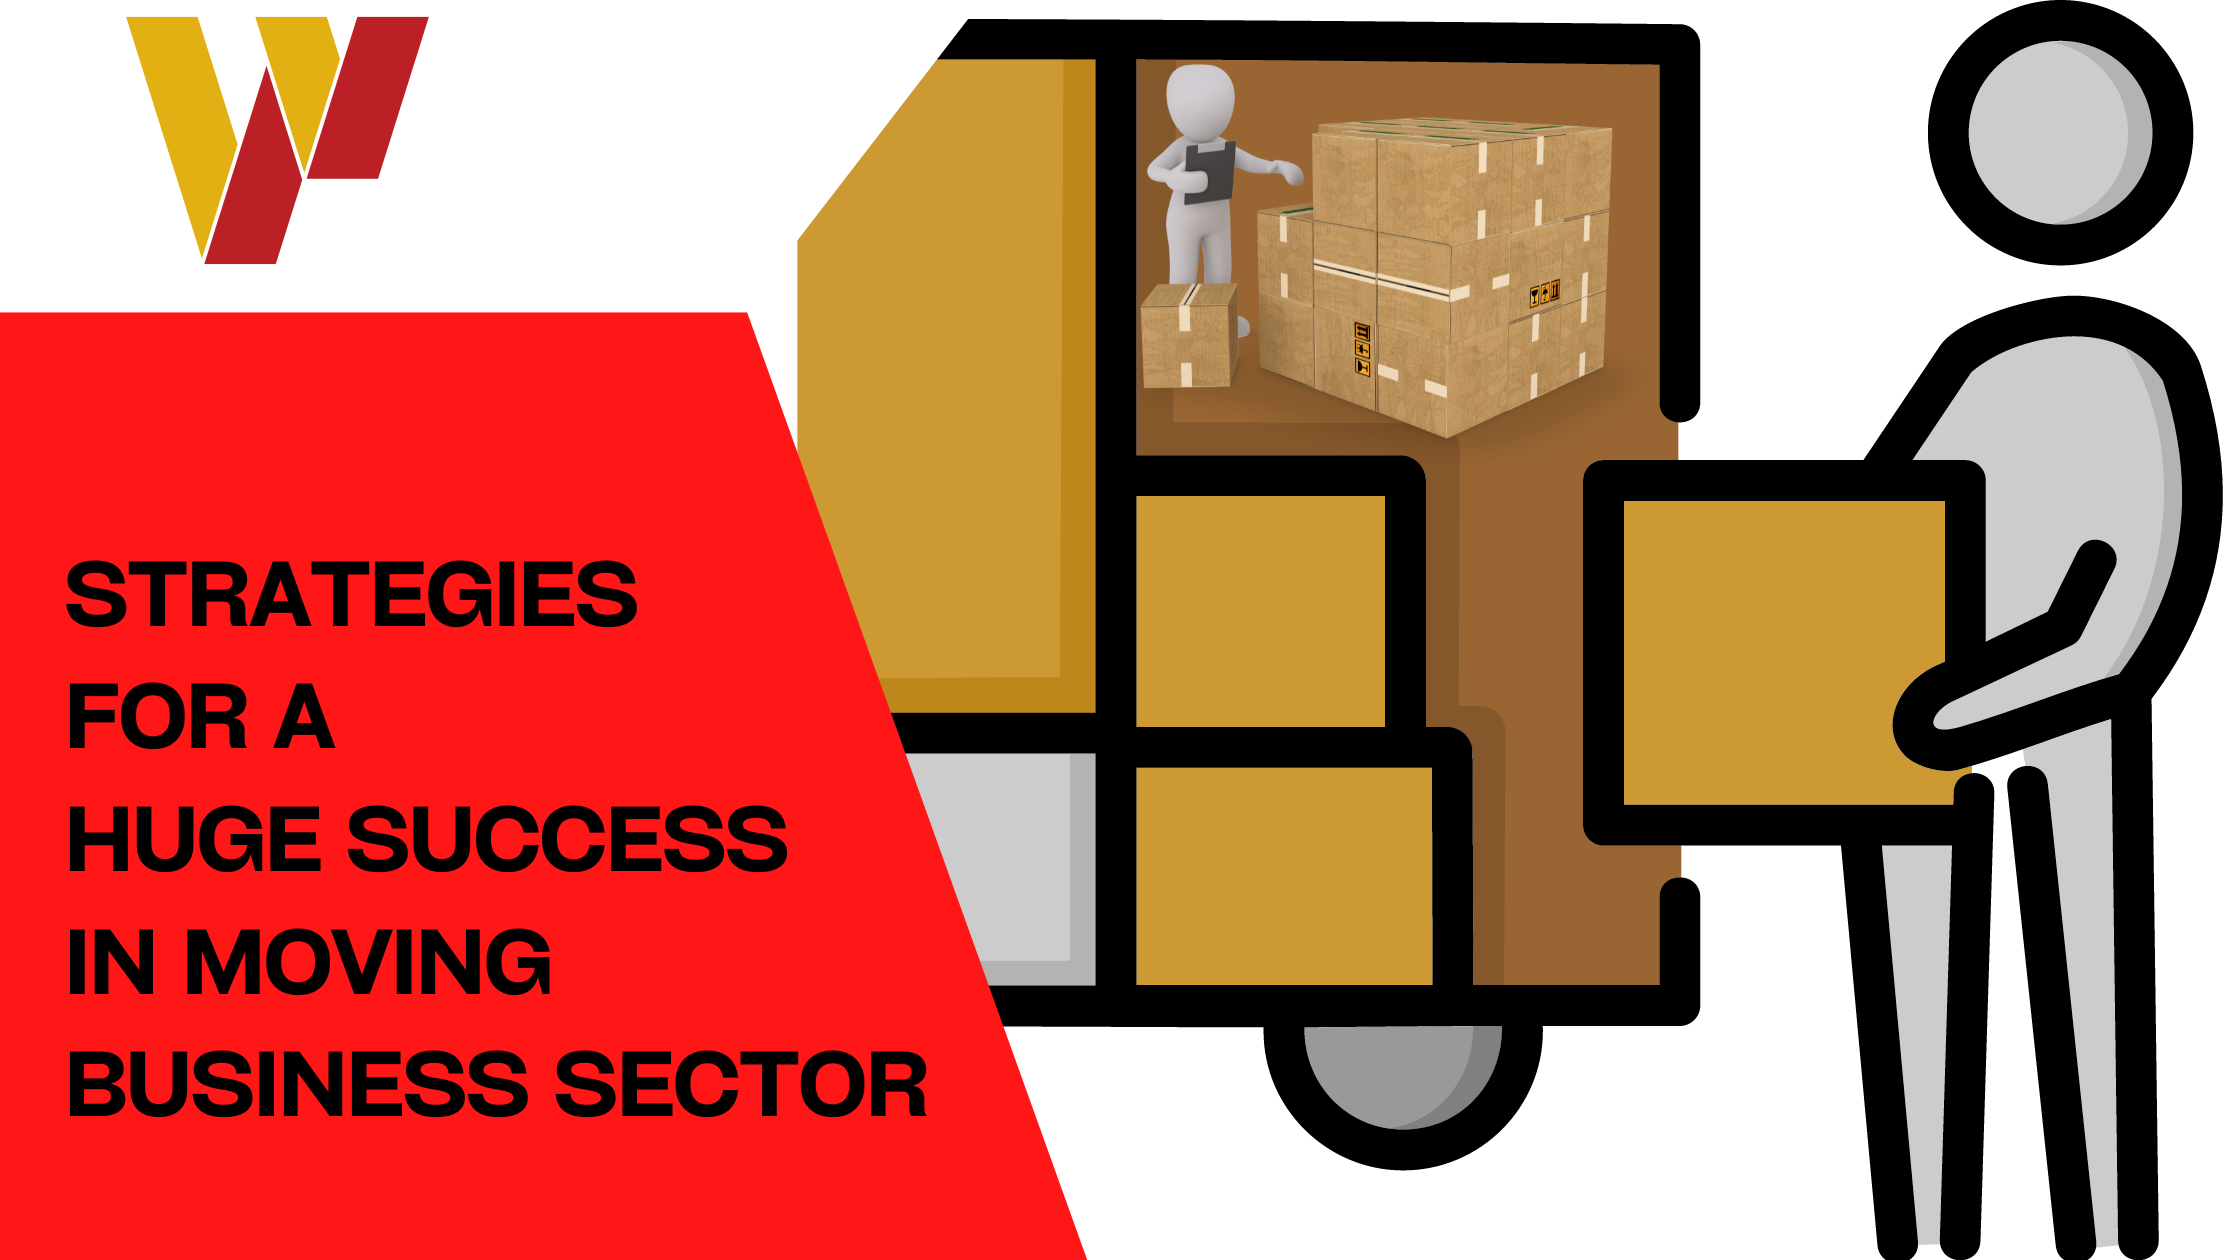 Strategies for Packers and Movers Business